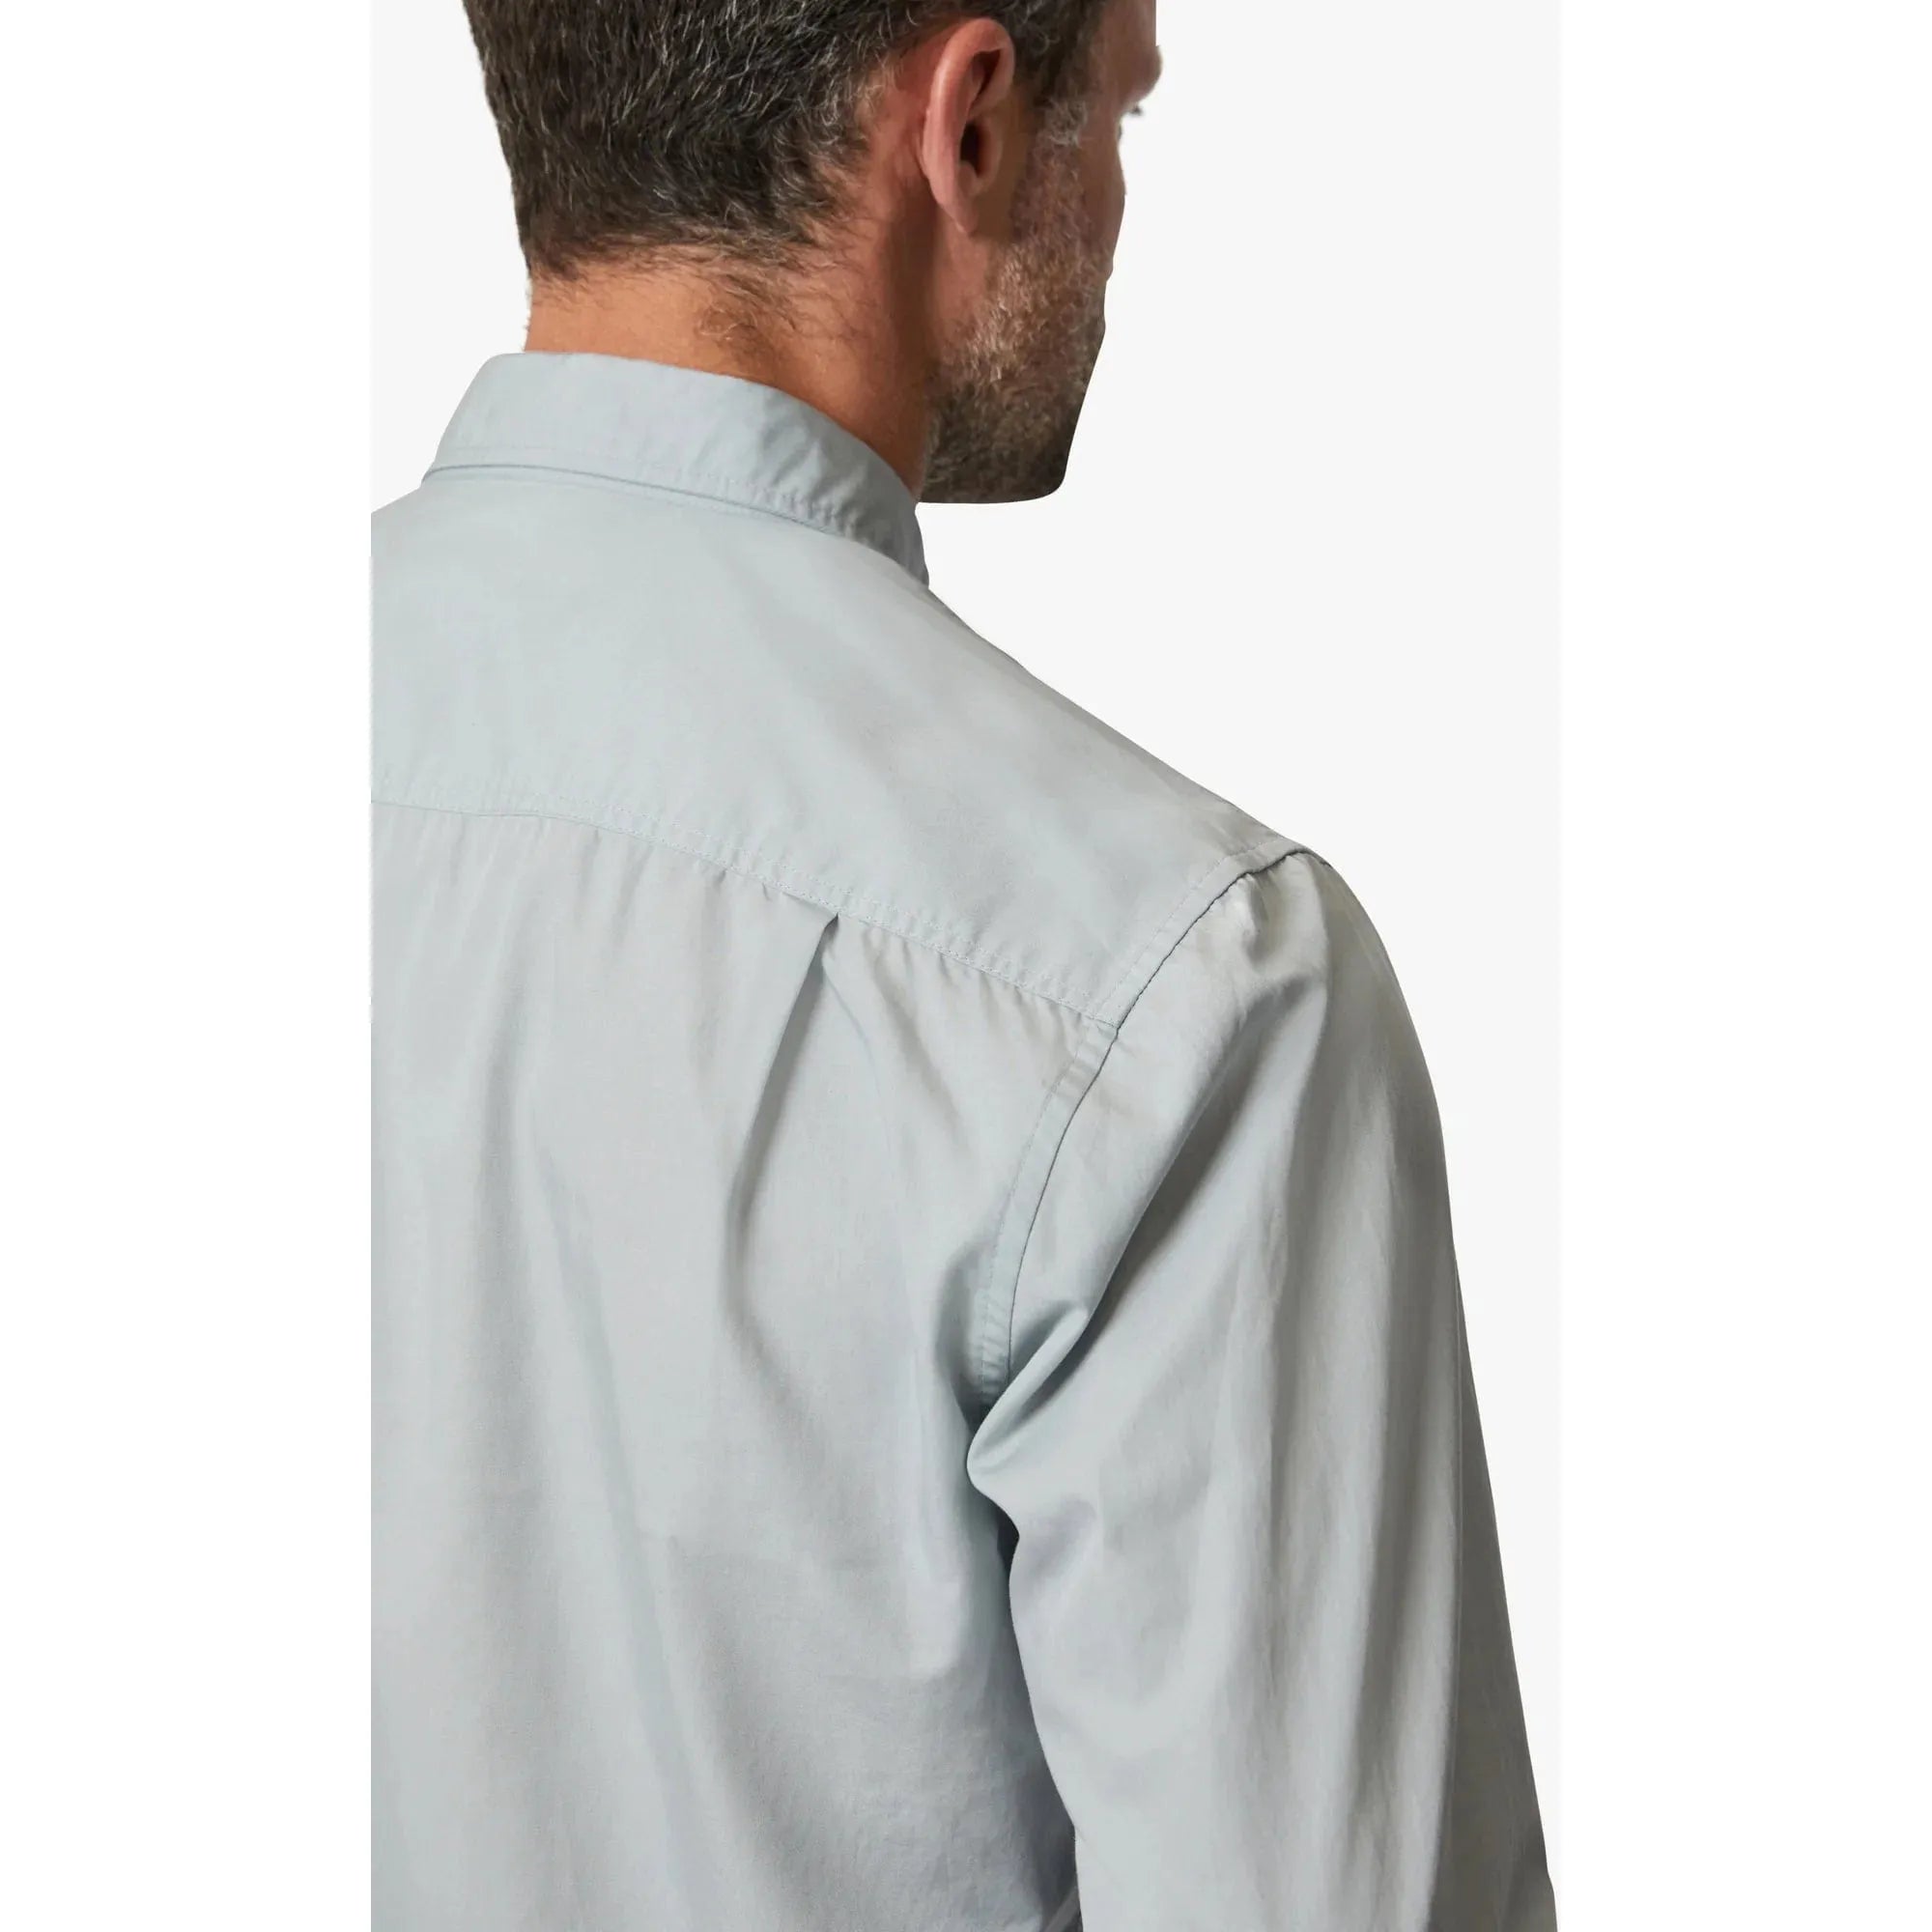 34 Heritage 34 Heritage Luxe Twill Shirt